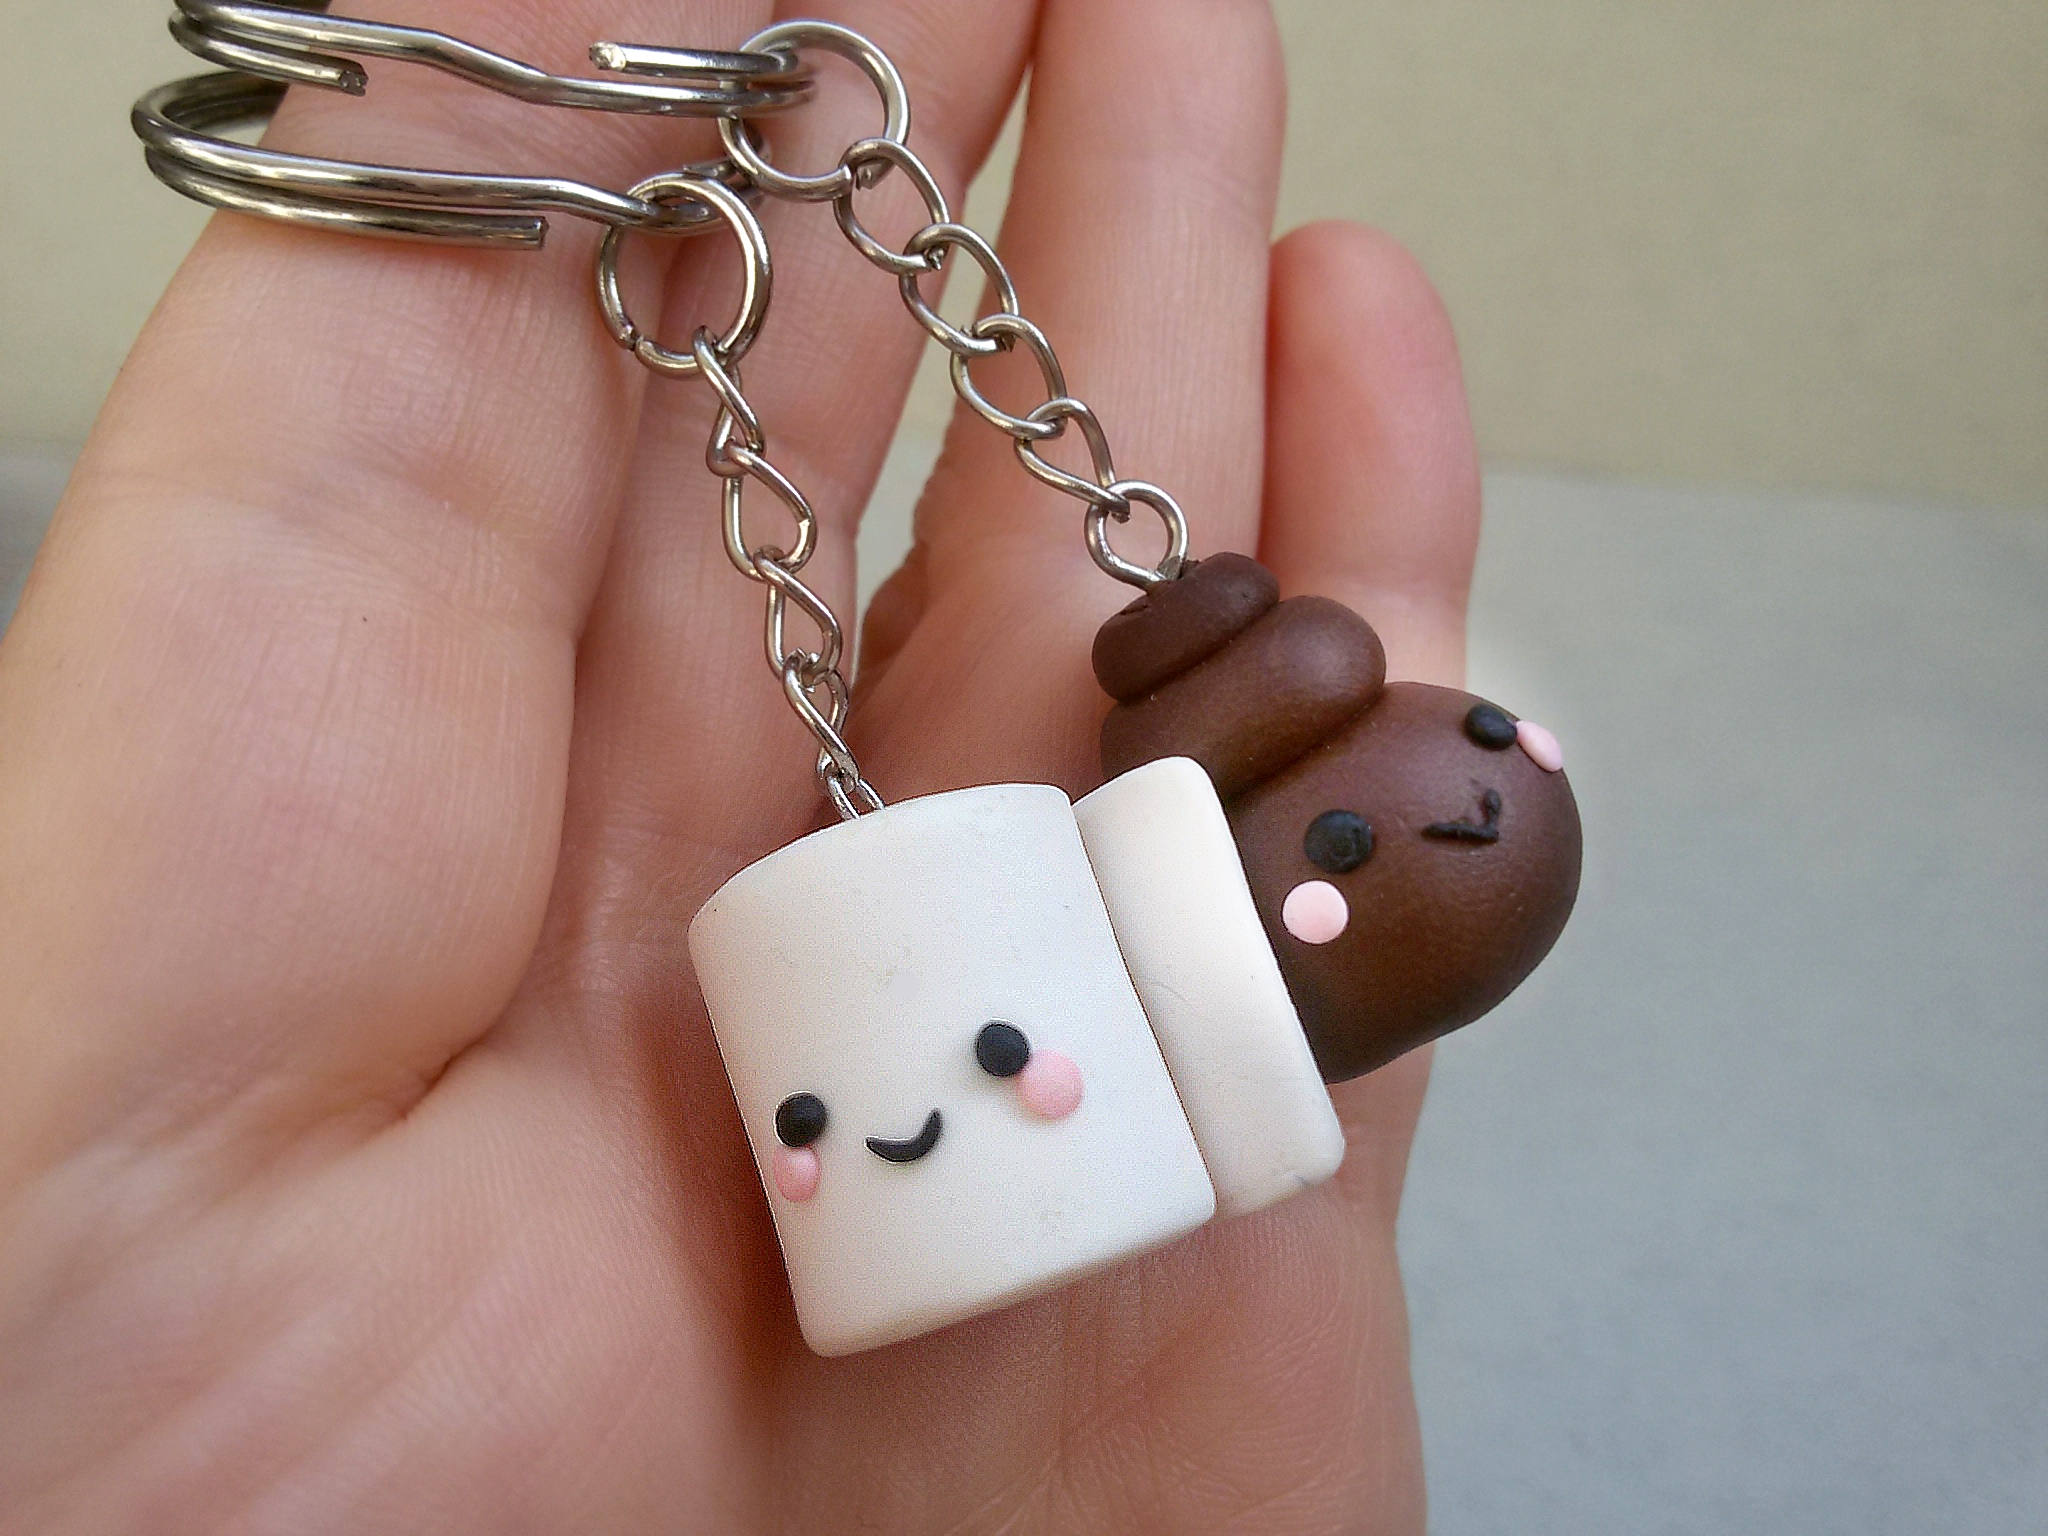 Toilet paper and poop keychain best friend keychain BFF gift best friend  charms kawaii charms poop and toilet paper best friend necklaces